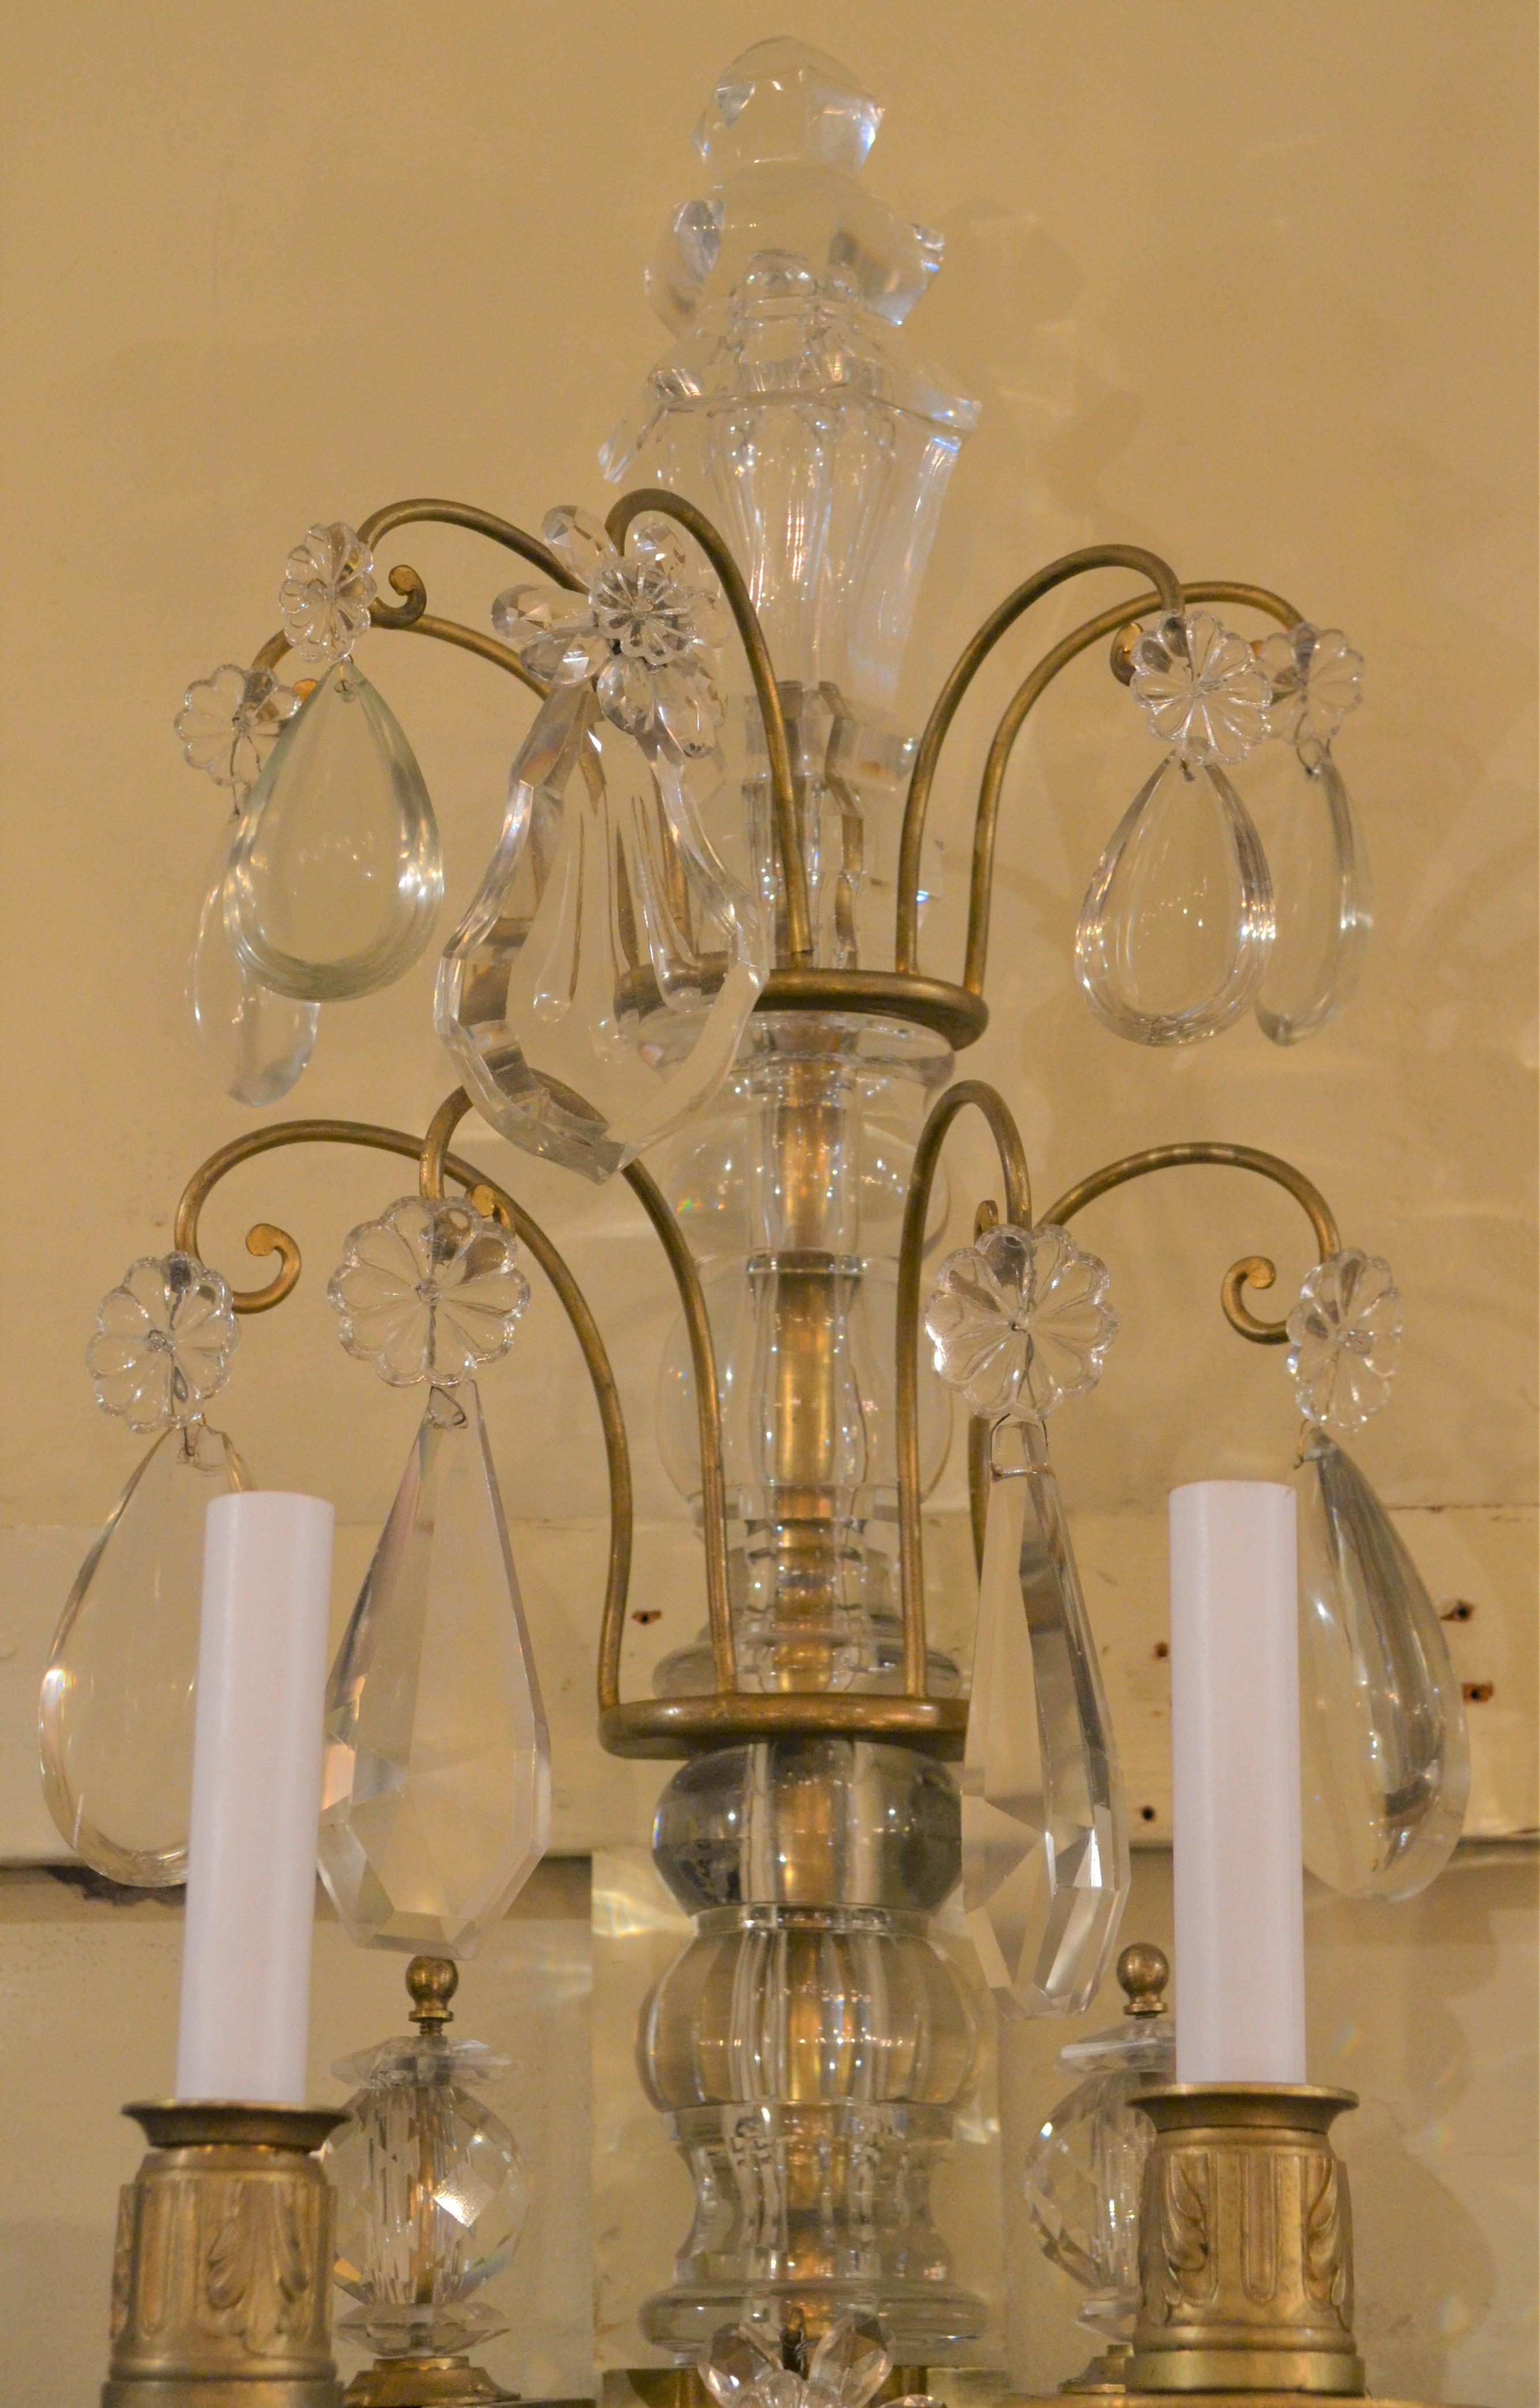 These sconces stand over three feet high and are exceptional in design. The old Baccarat crystal shimmers and the ormolu finish remains strong.